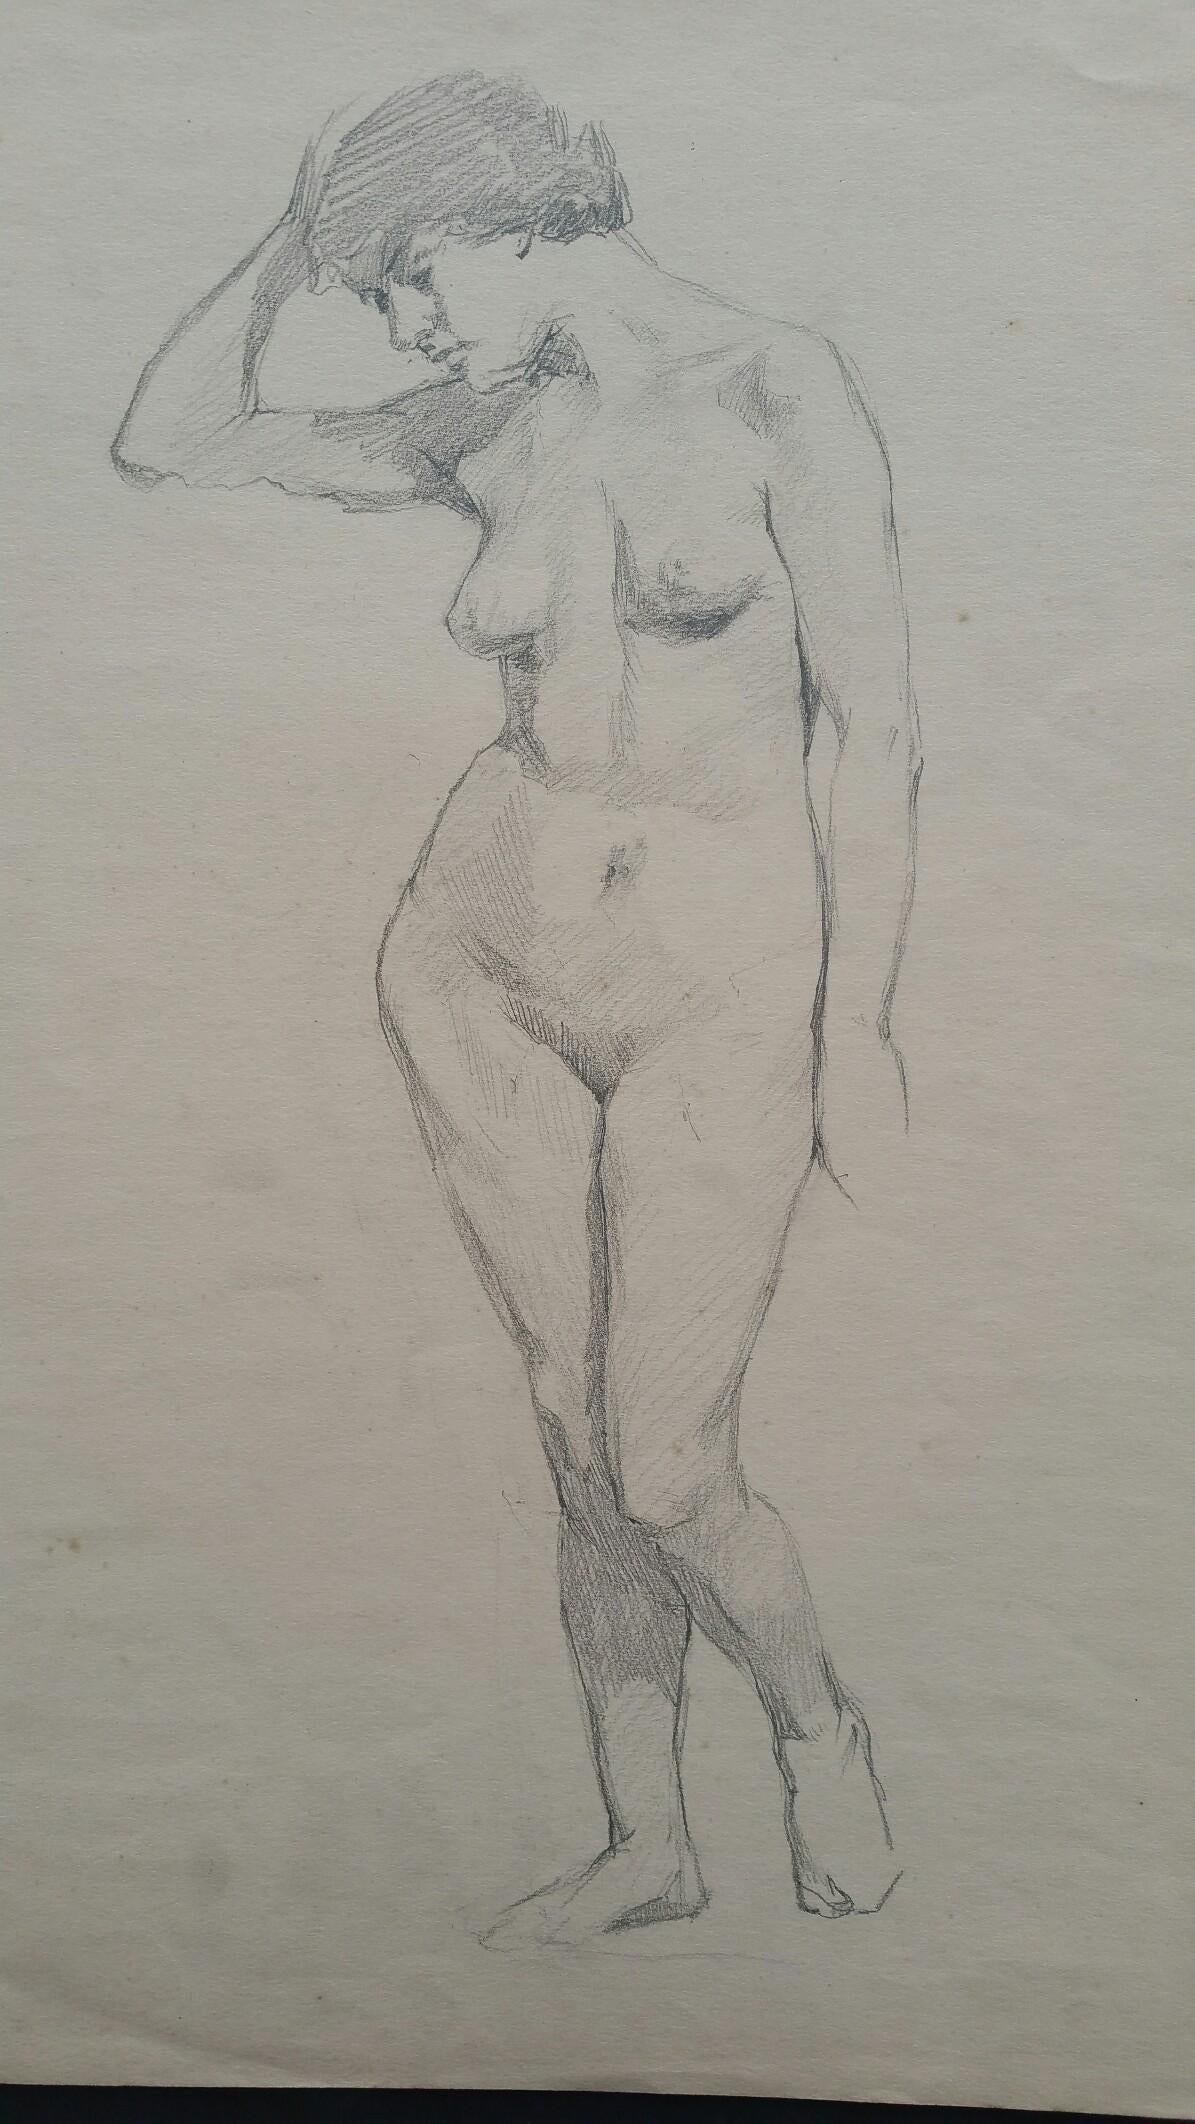 English Graphite Sketch of a Female Nude, Forward Facing
by Henry George Moon (British 1857-1905)
on off white artists paper, unframed
measurements: sheet 22 x 14.75 inches 

provenance: from the artists estate

Condition report: pin holes to